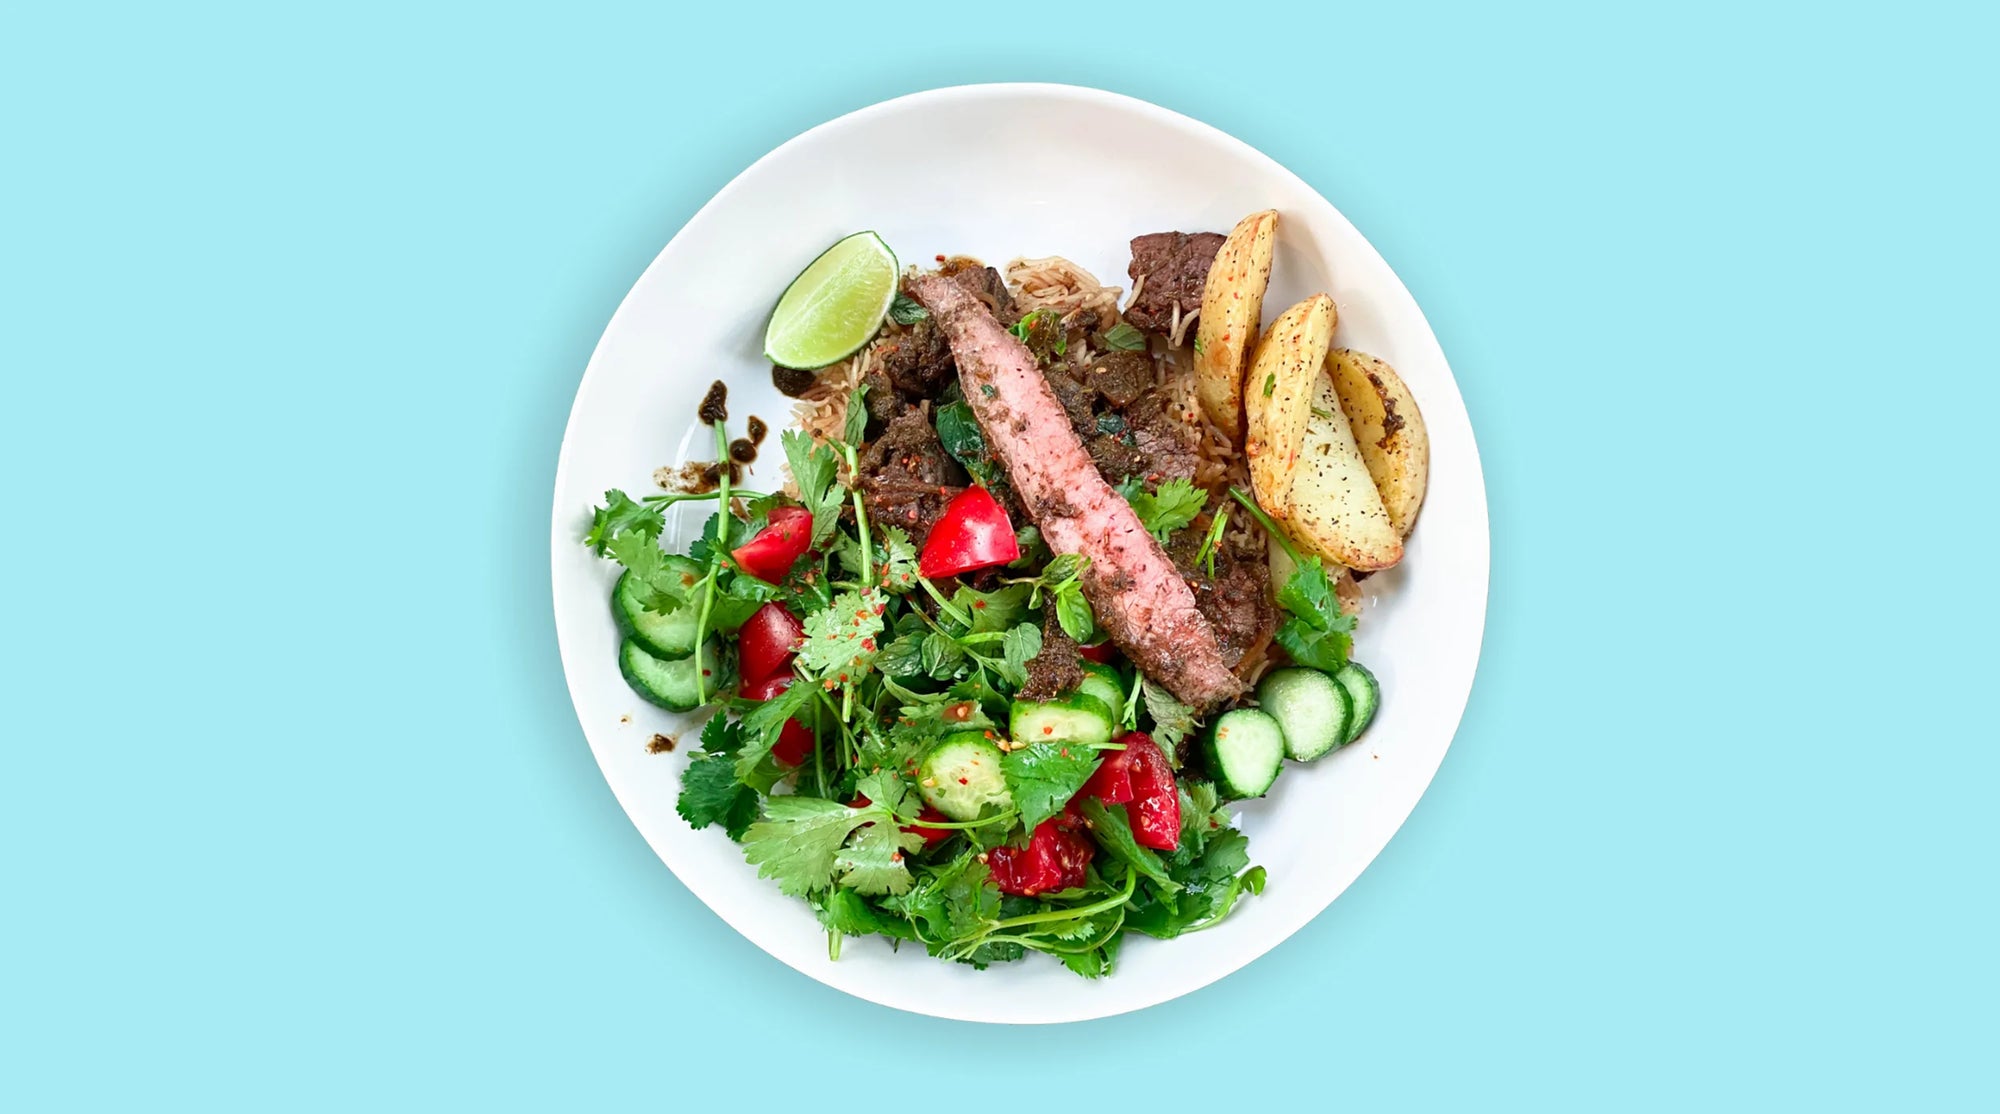 A white plate with Steak and vegetables on it on blue background can be seen.